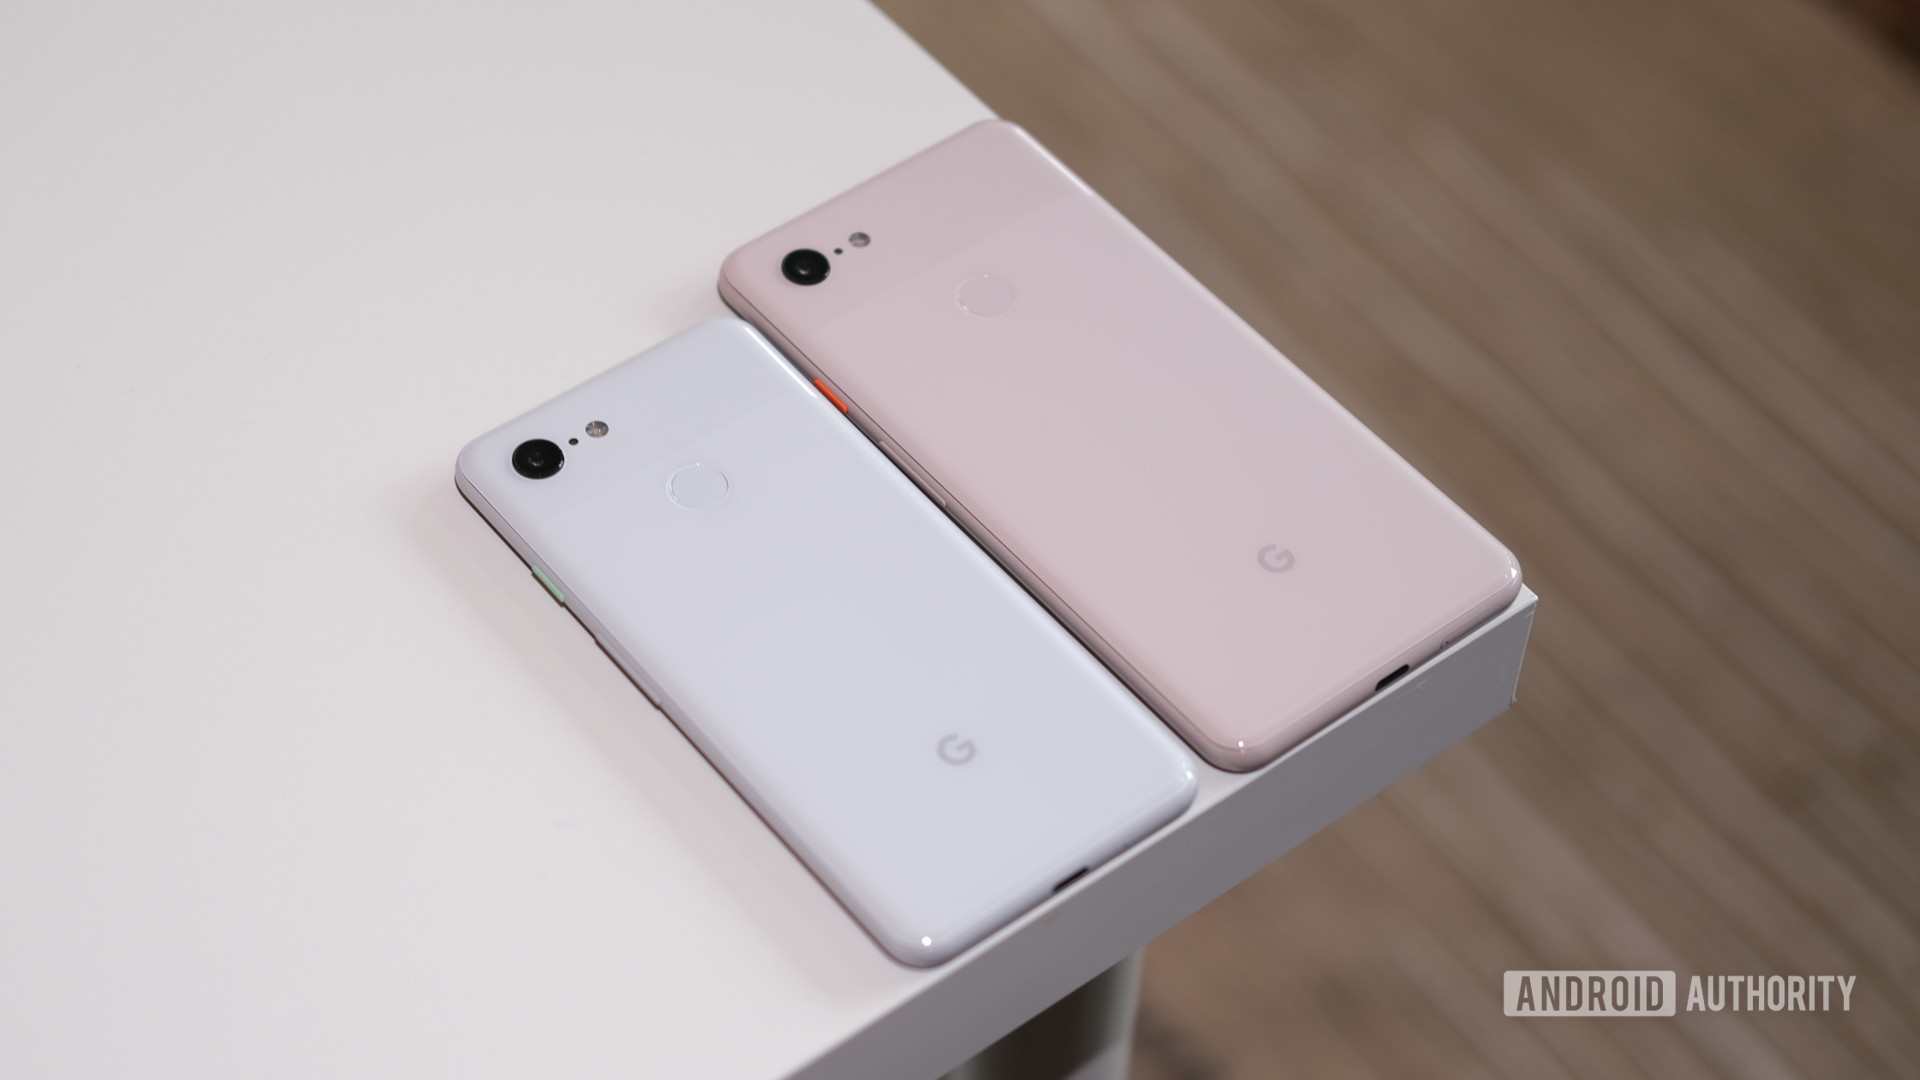 Pixel 3 and Pixel 3 XL are Google's latest flagships